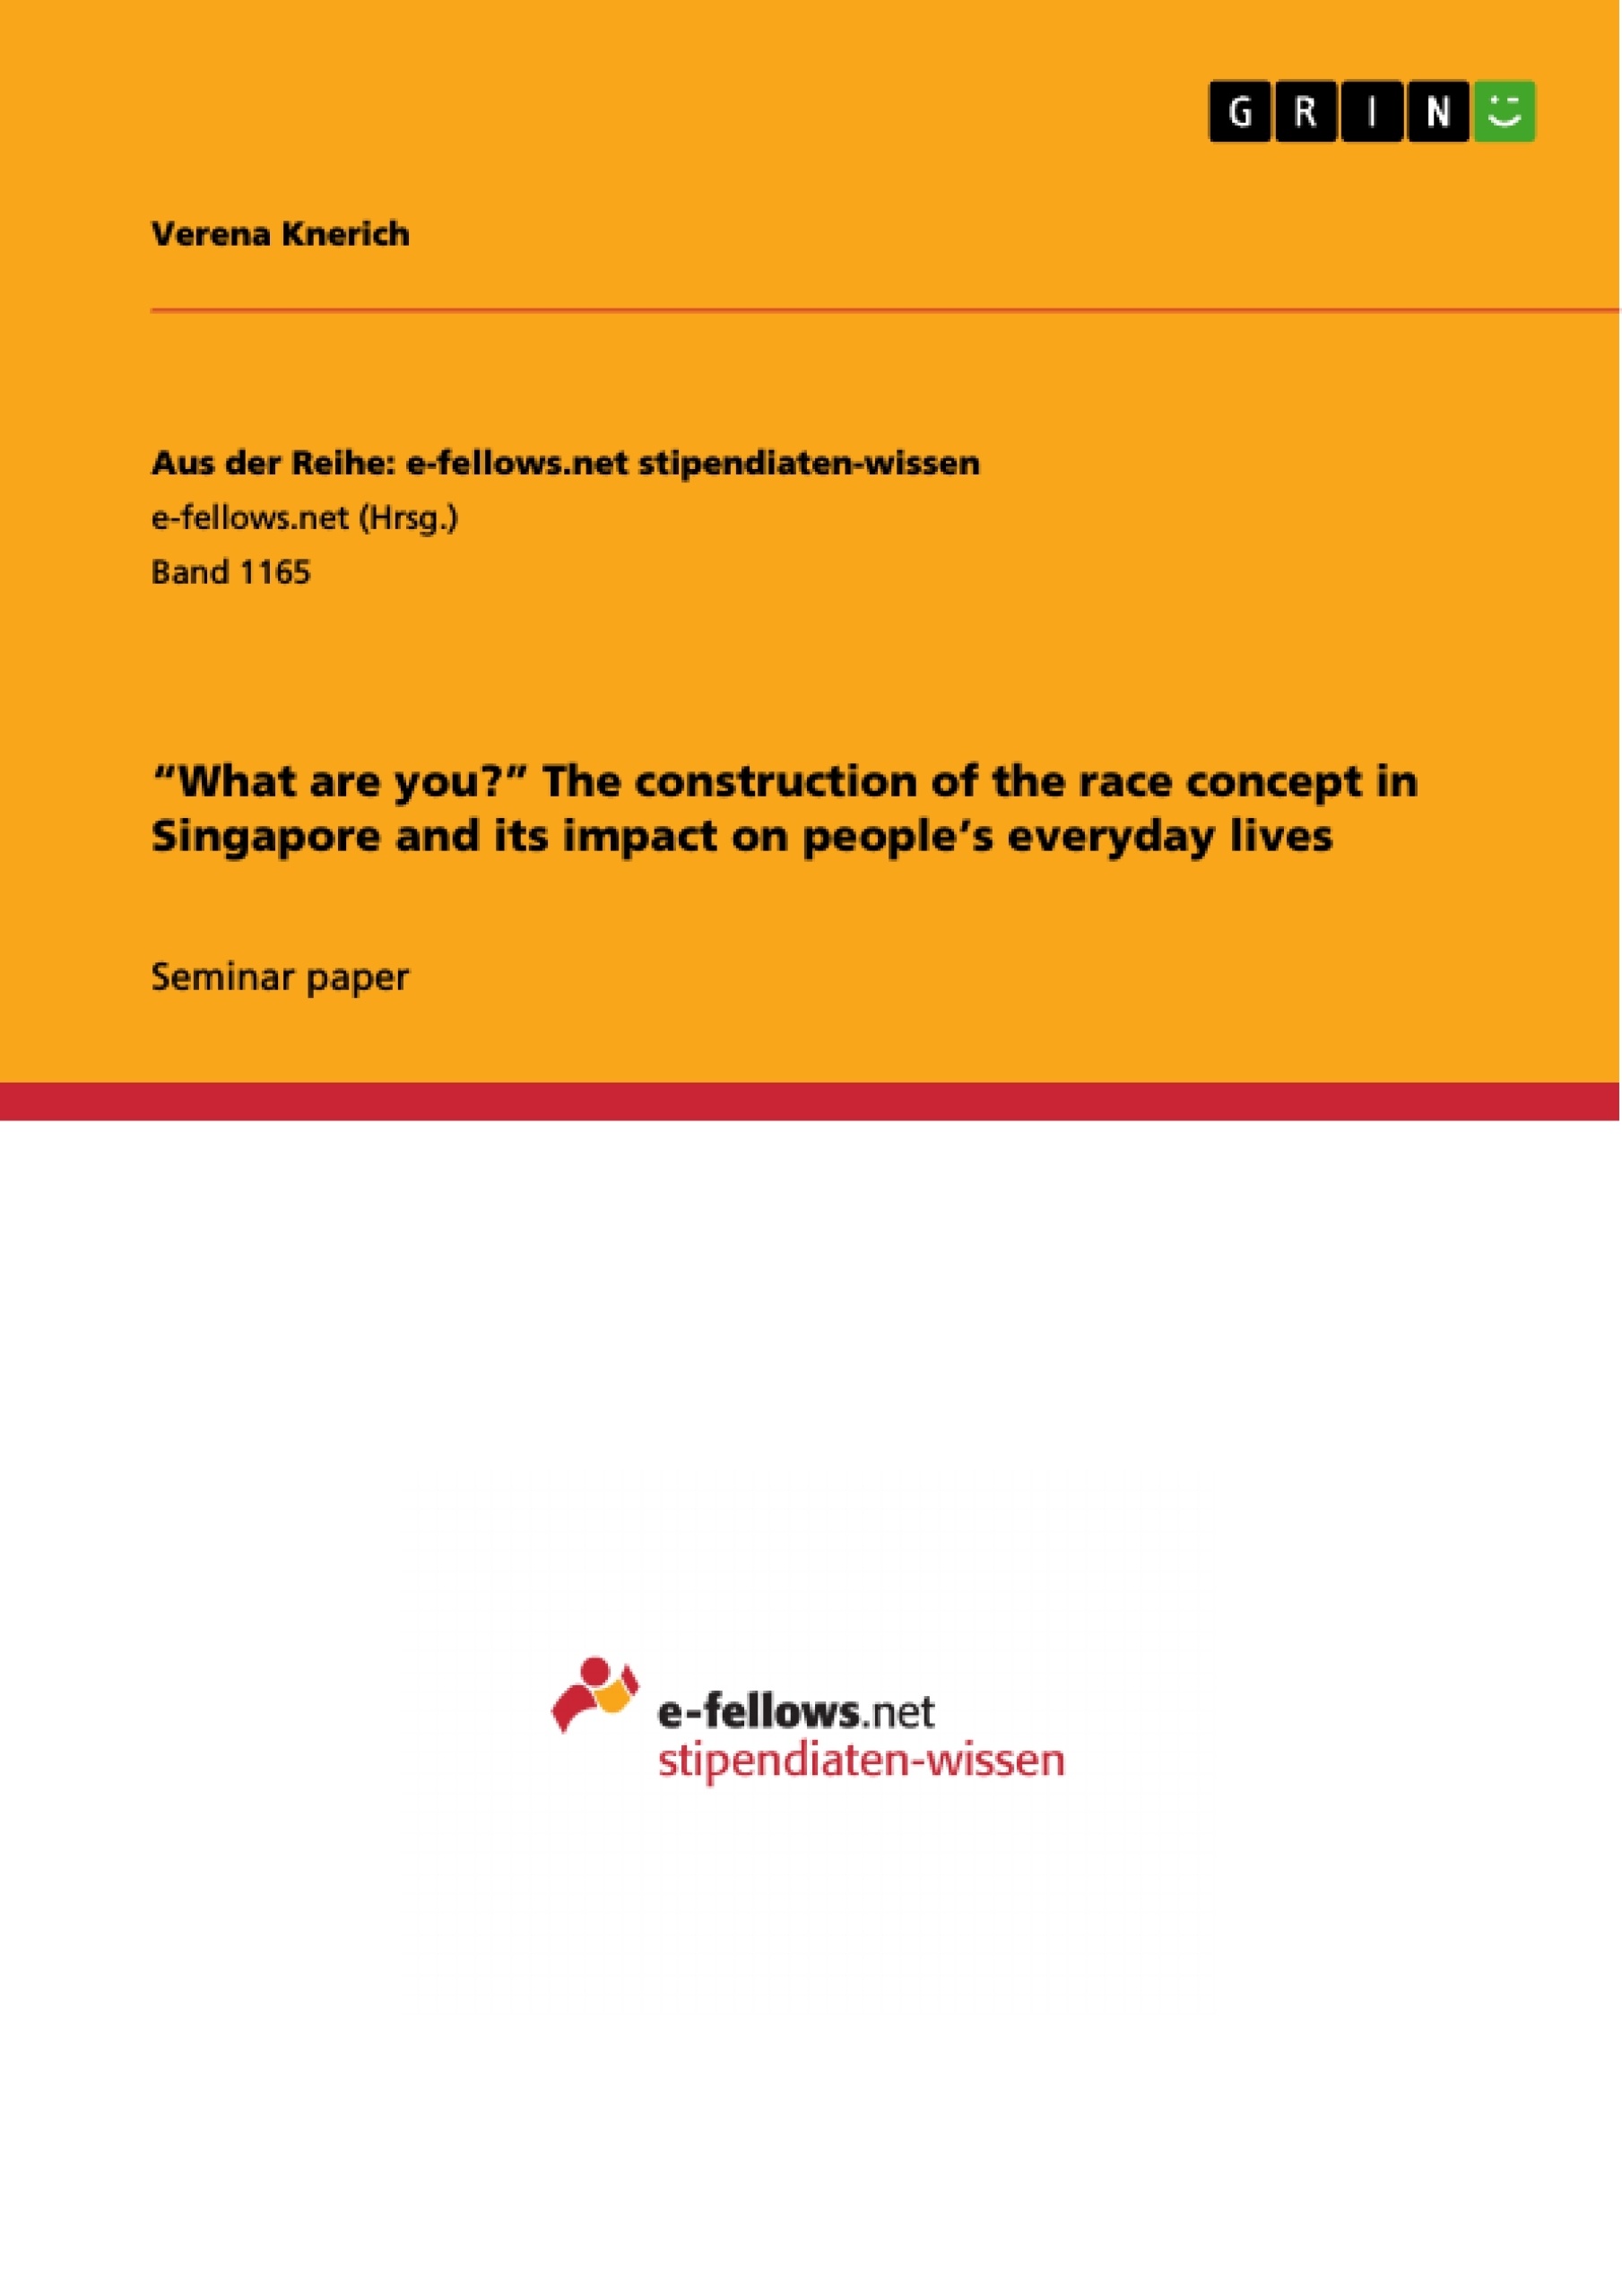 Título: “What are you?” The construction of the race concept in Singapore and its impact on people’s everyday lives